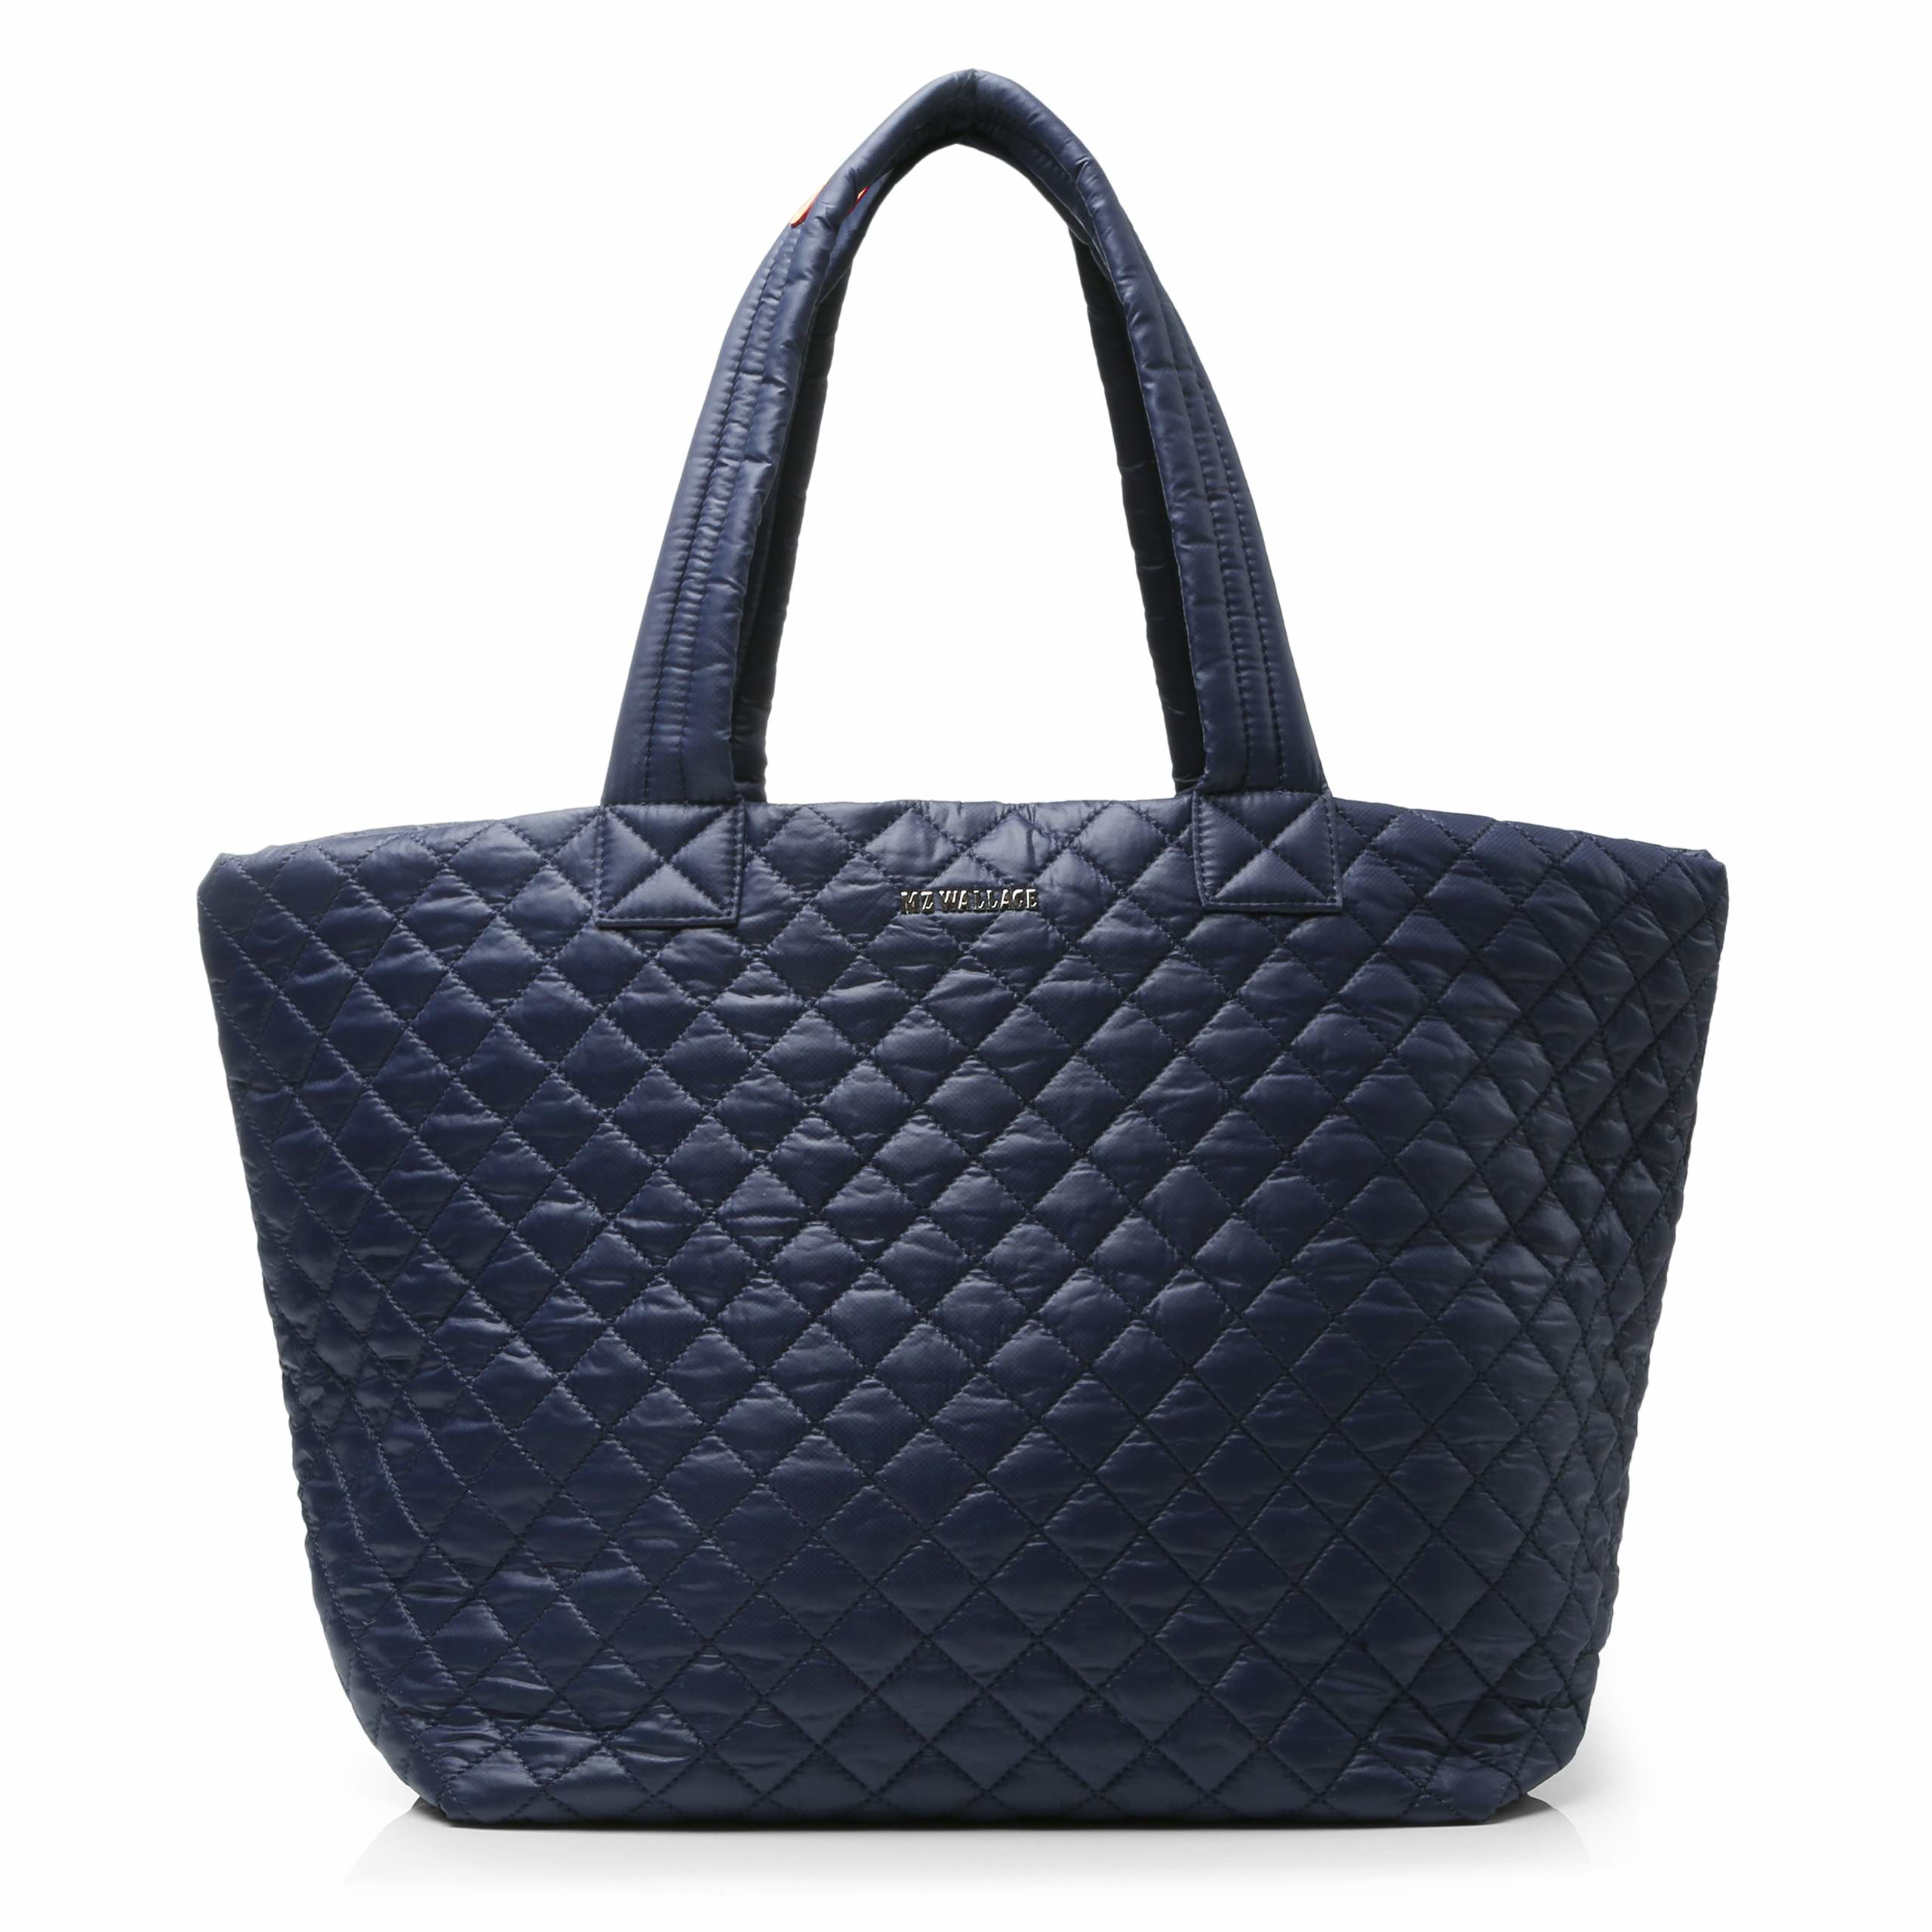 Lyst - Mz wallace Dawn Oxford Large Metro Tote in Blue